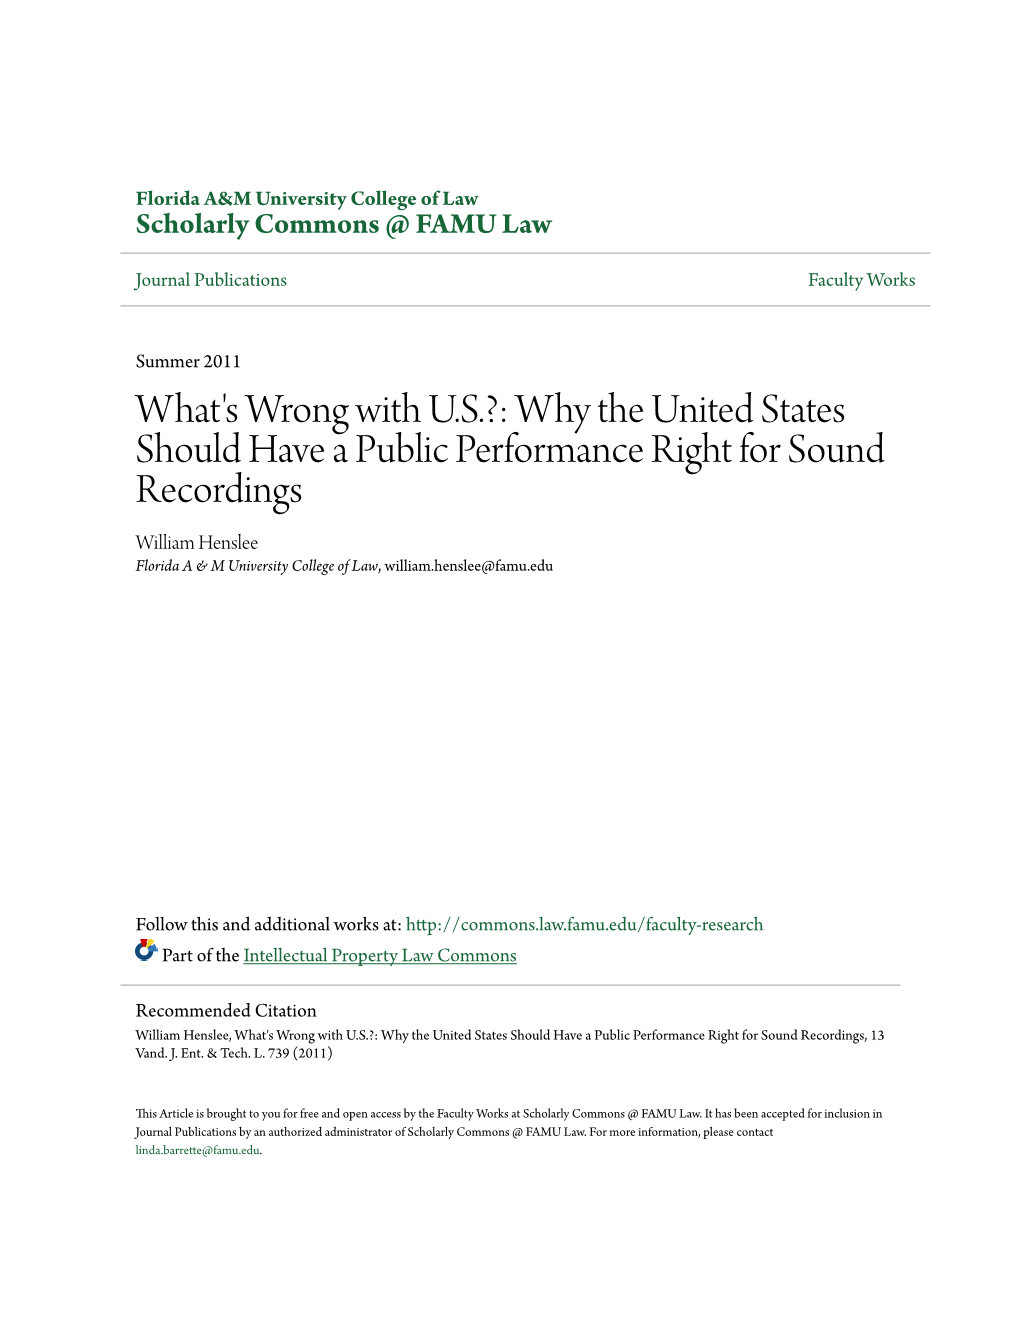 Why the United States Should Have a Public Performance Right for Sound Recordings William Henslee Florida a & M University College of Law, William.Henslee@Famu.Edu